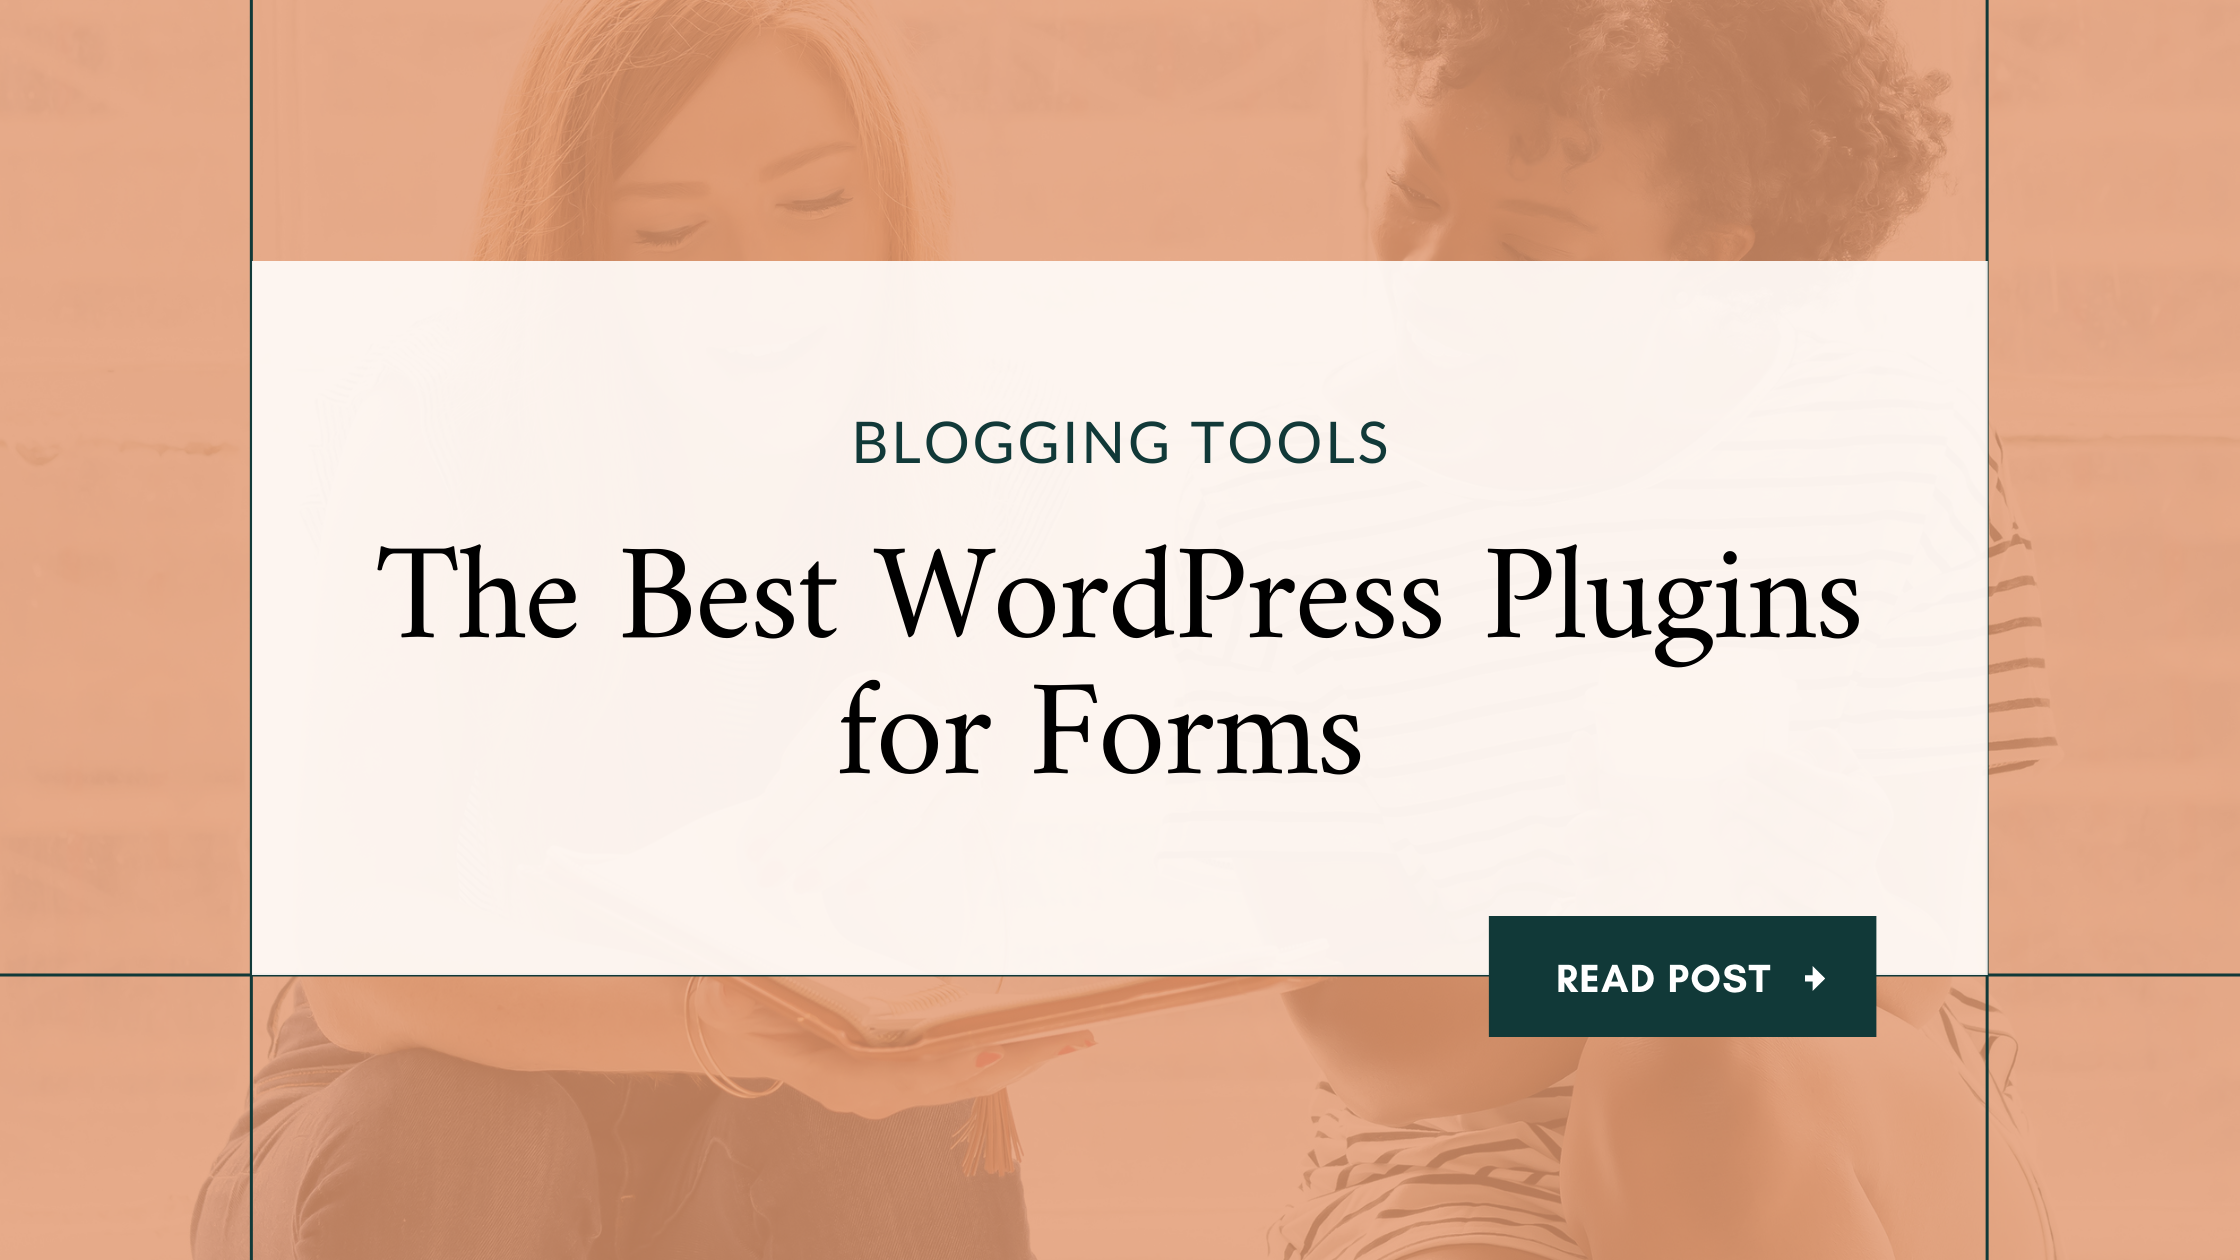 The Best WordPress Plugins for Forms